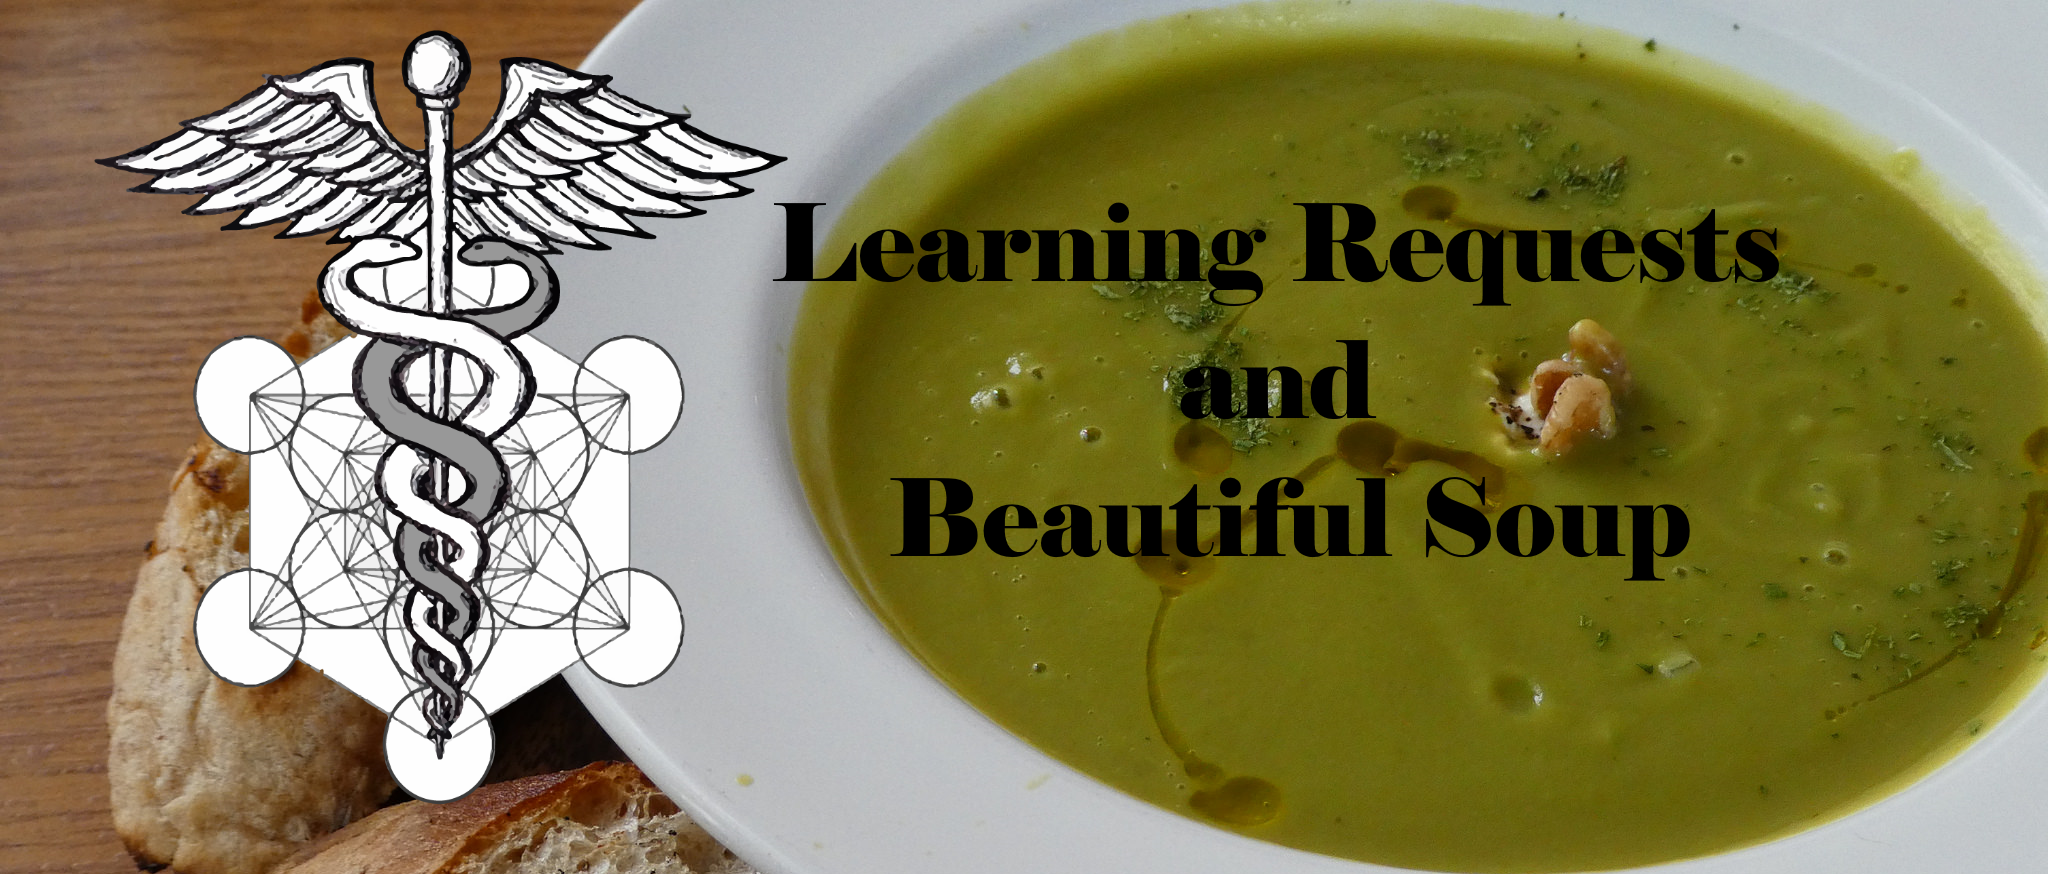 Python Requests and Beautiful Soup - Playing with HTTP Requests, HTML Parsing and APIs